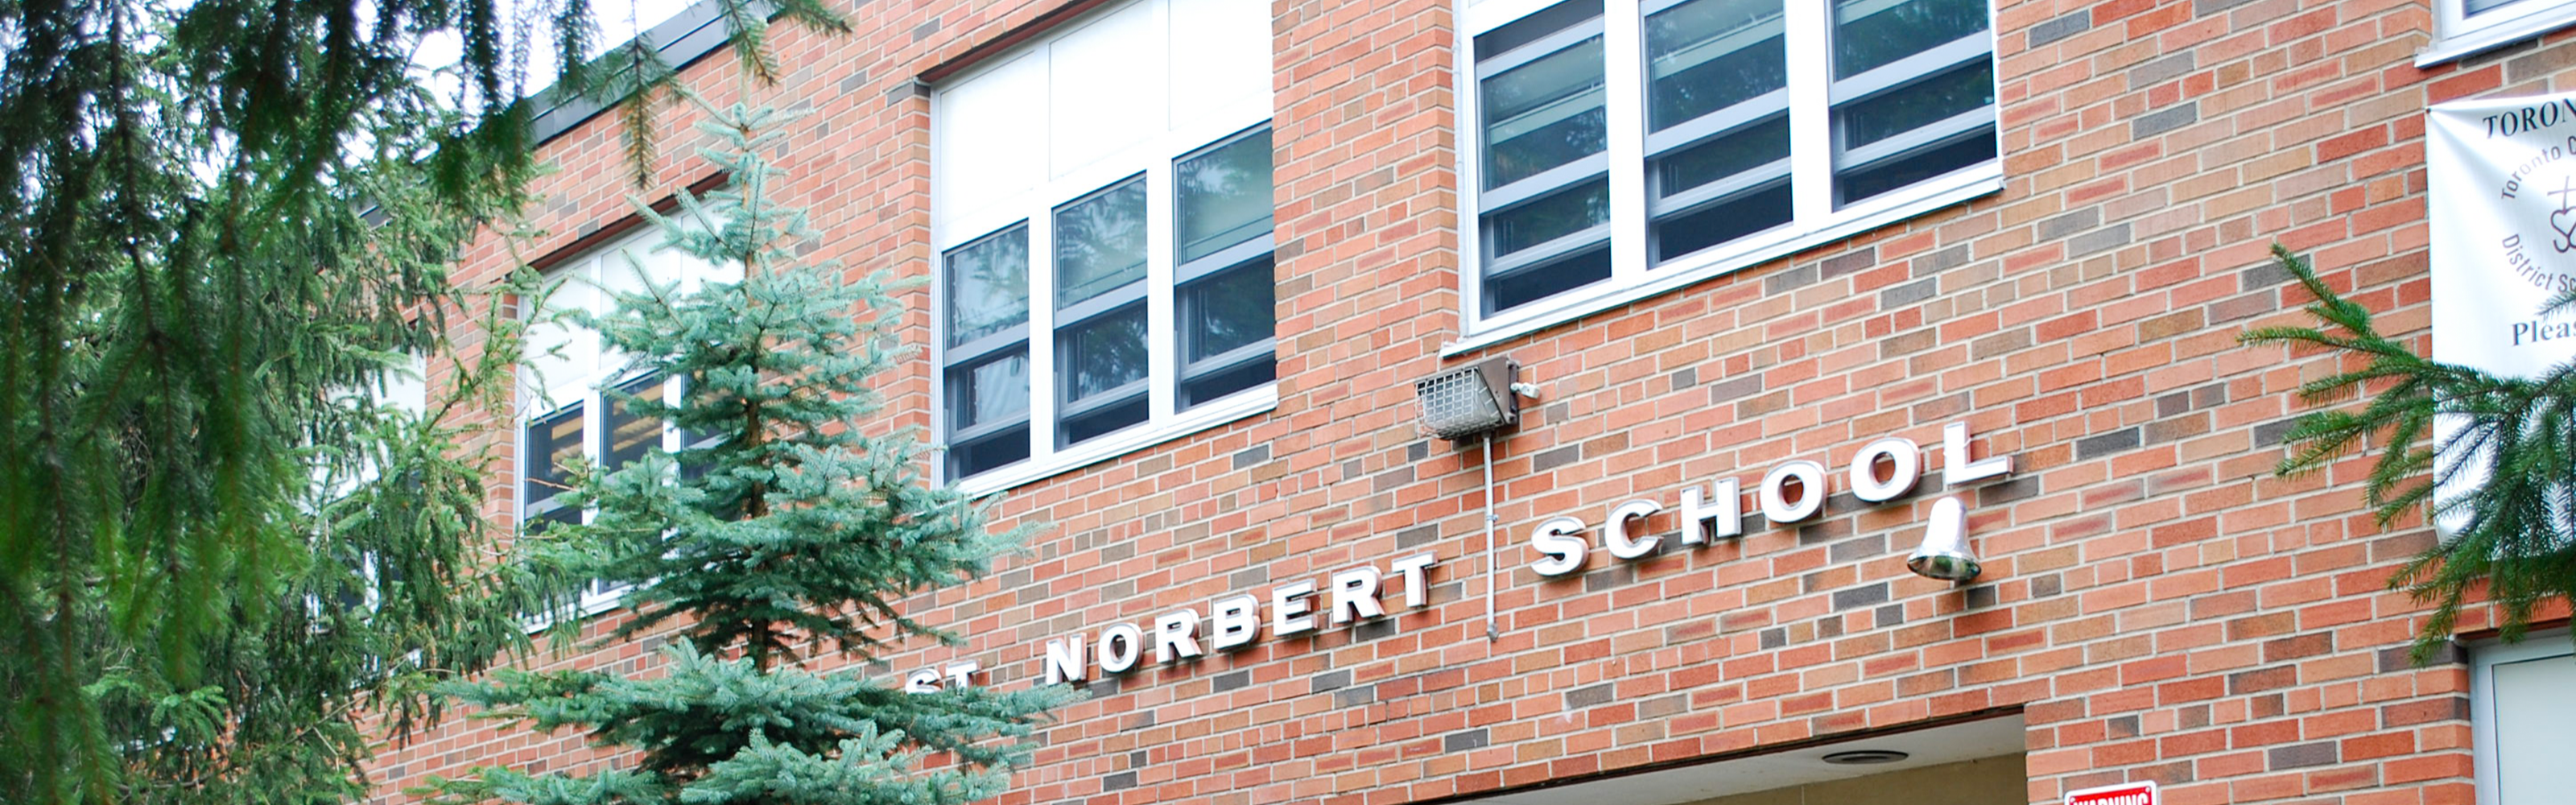 The front of the  St. Norbert Catholic School building.